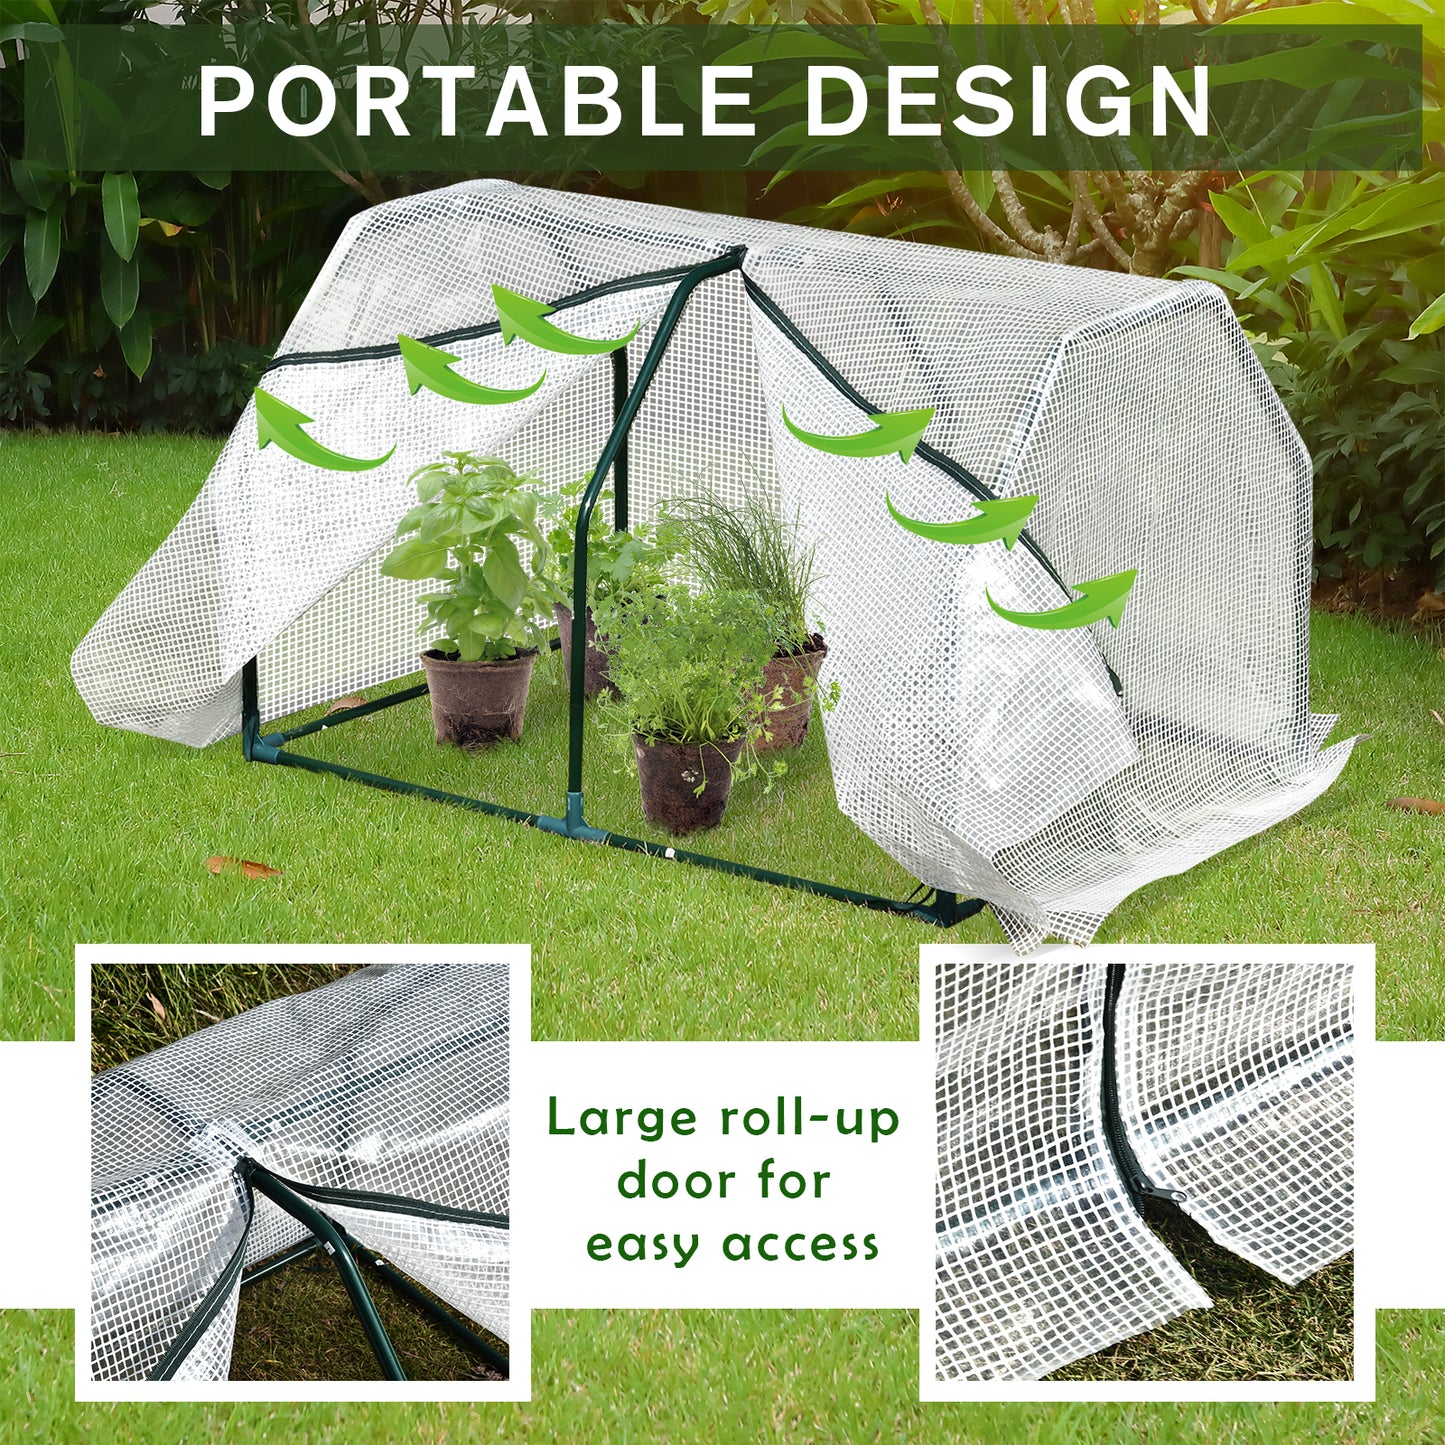 Outsunny Portable Greenhouse Oasis: Mini Metal Frame with PVC Cover, Zippered Access, 99x71x60cm, White